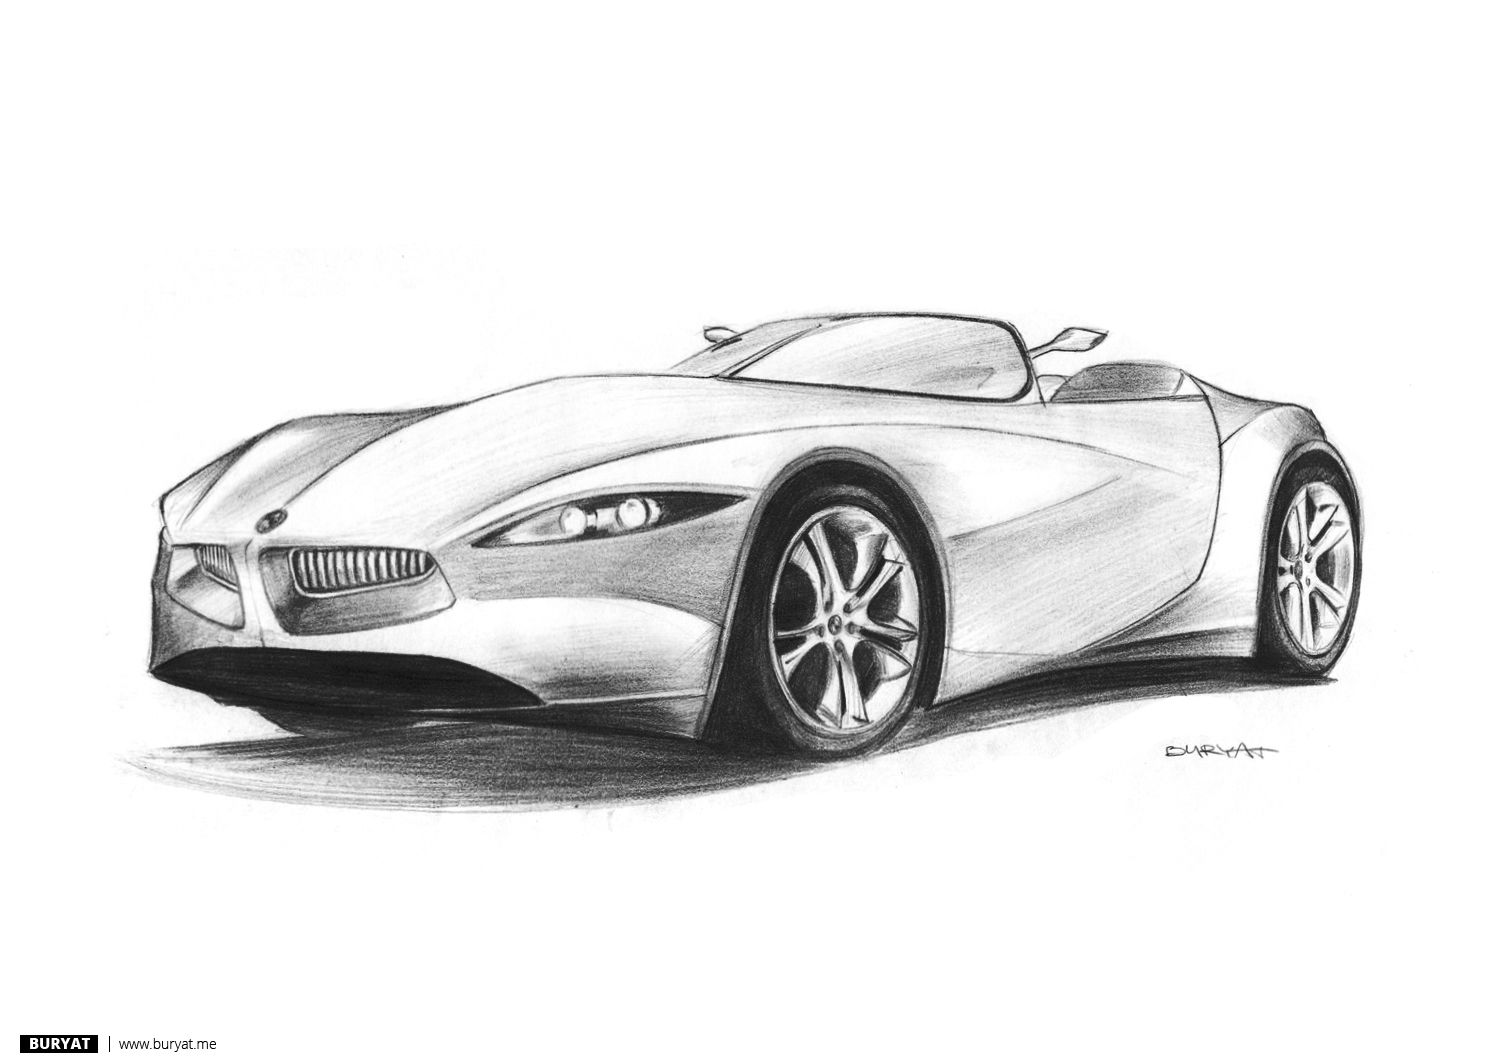 Car Drawings In Pencil, Wallpaper and Photo In HD Quality 1500x1063